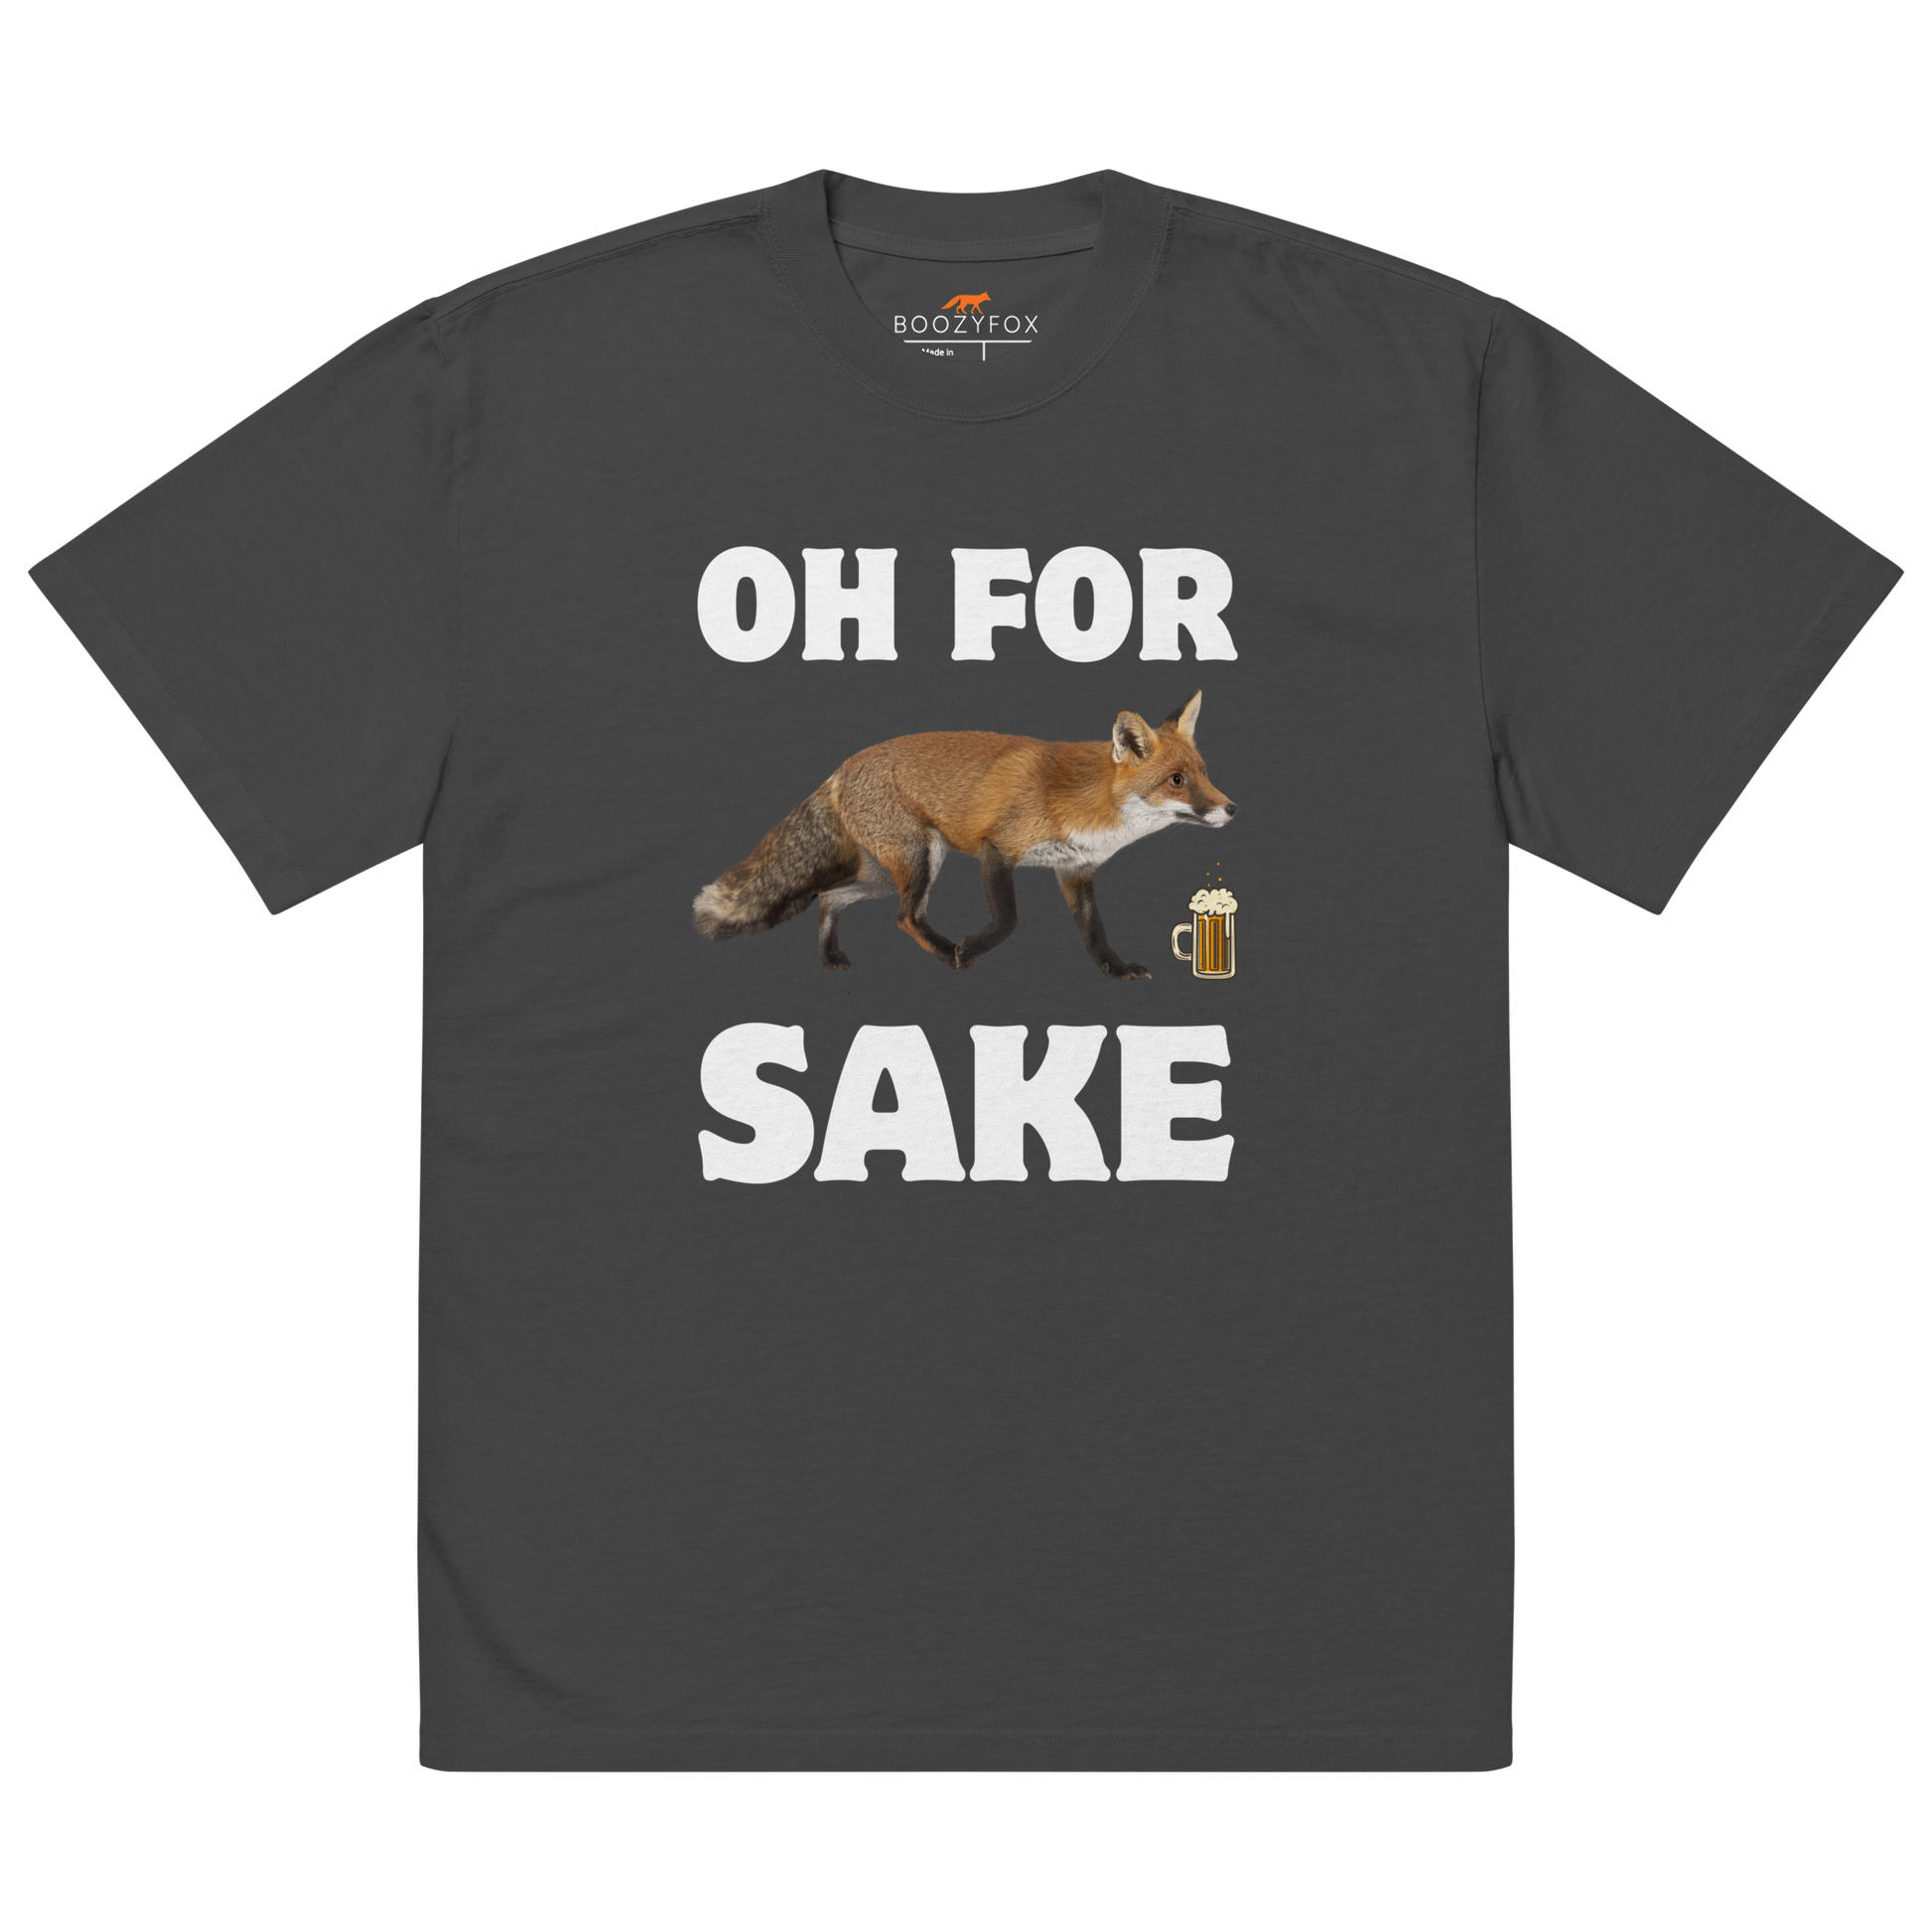 Faded Black Fox Oversized T-Shirt featuring a Oh For Fox Sake graphic on the chest - Funny Graphic Fox Oversized Tees - Boozy Fox